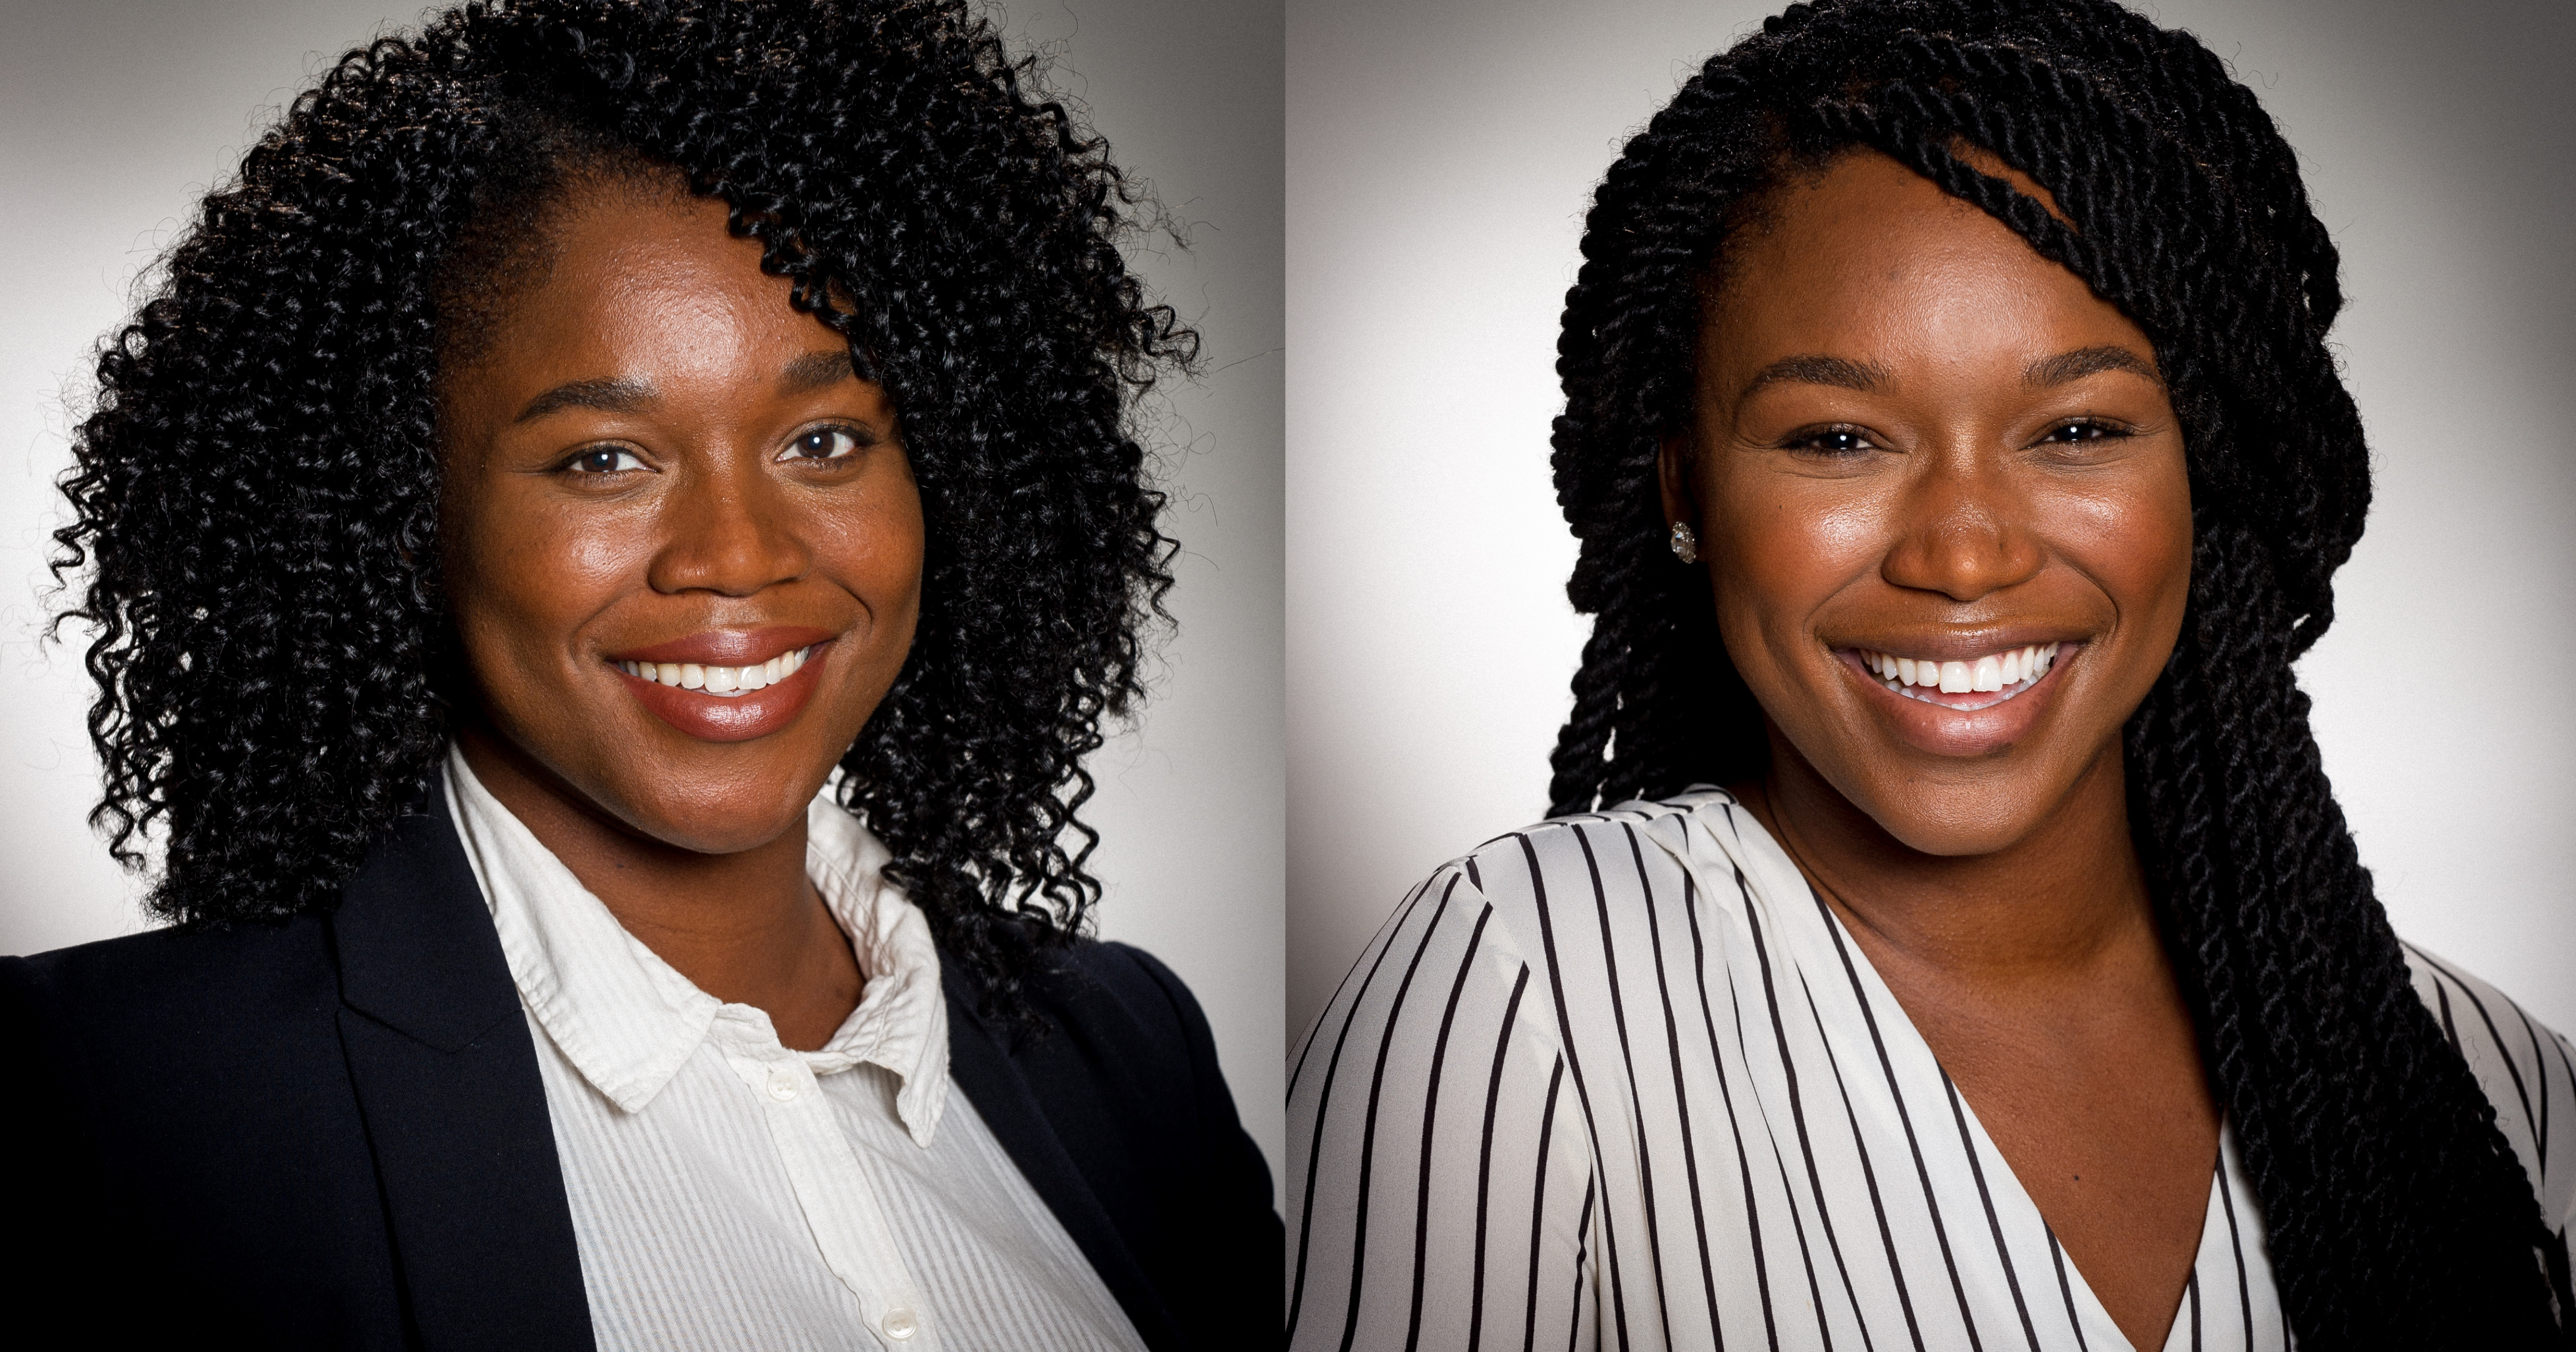 Born leaders: Oboh sisters excel as advocates for minority students in medical school 